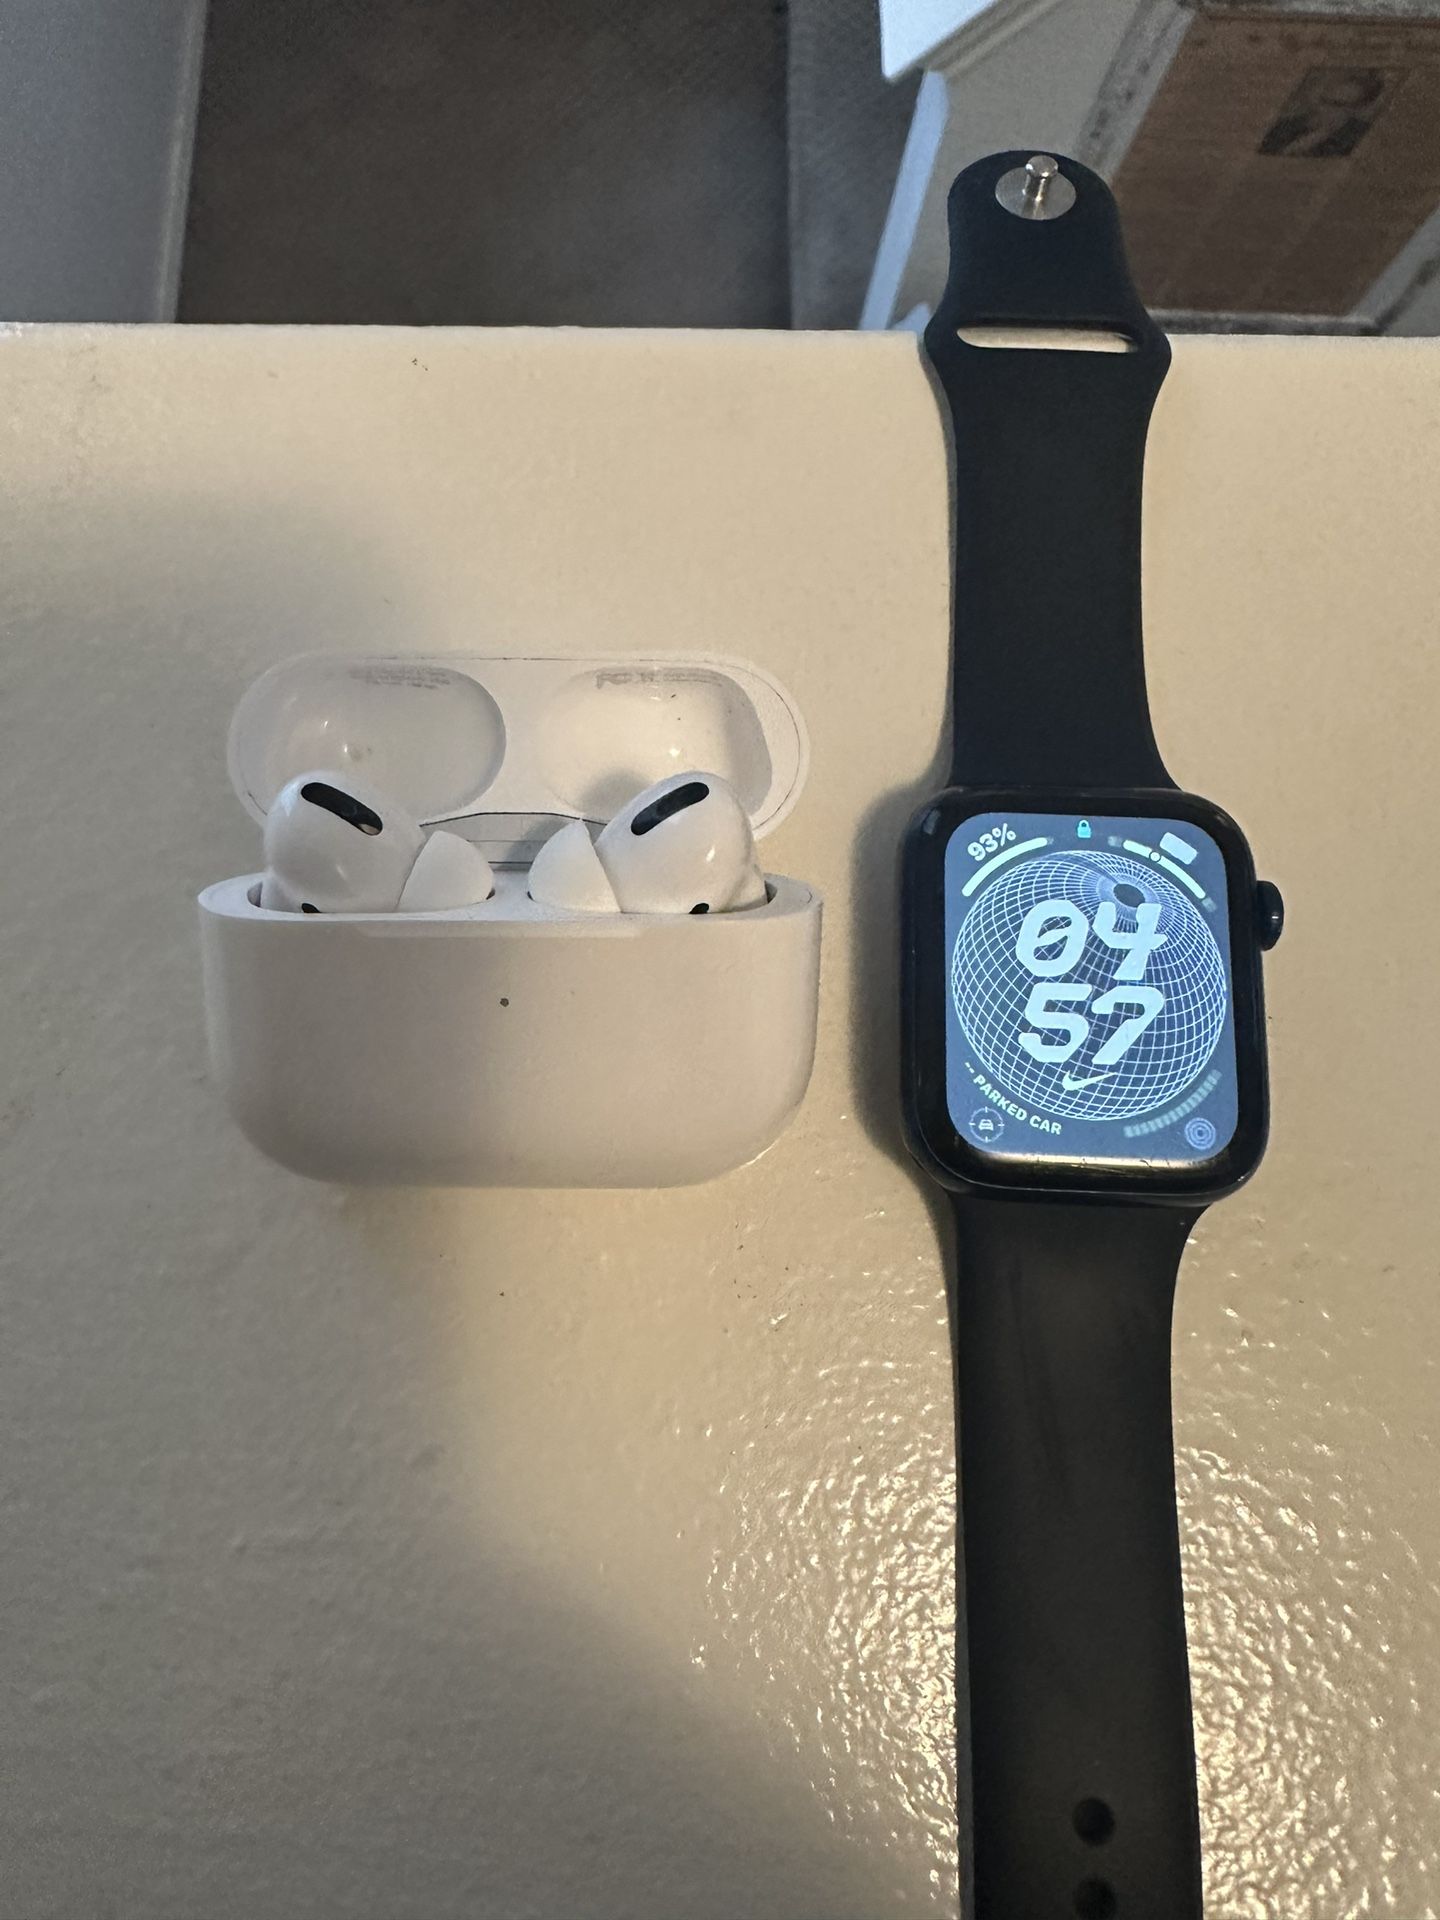 Apple Watch Series 6 And AirPods Pro. Used.